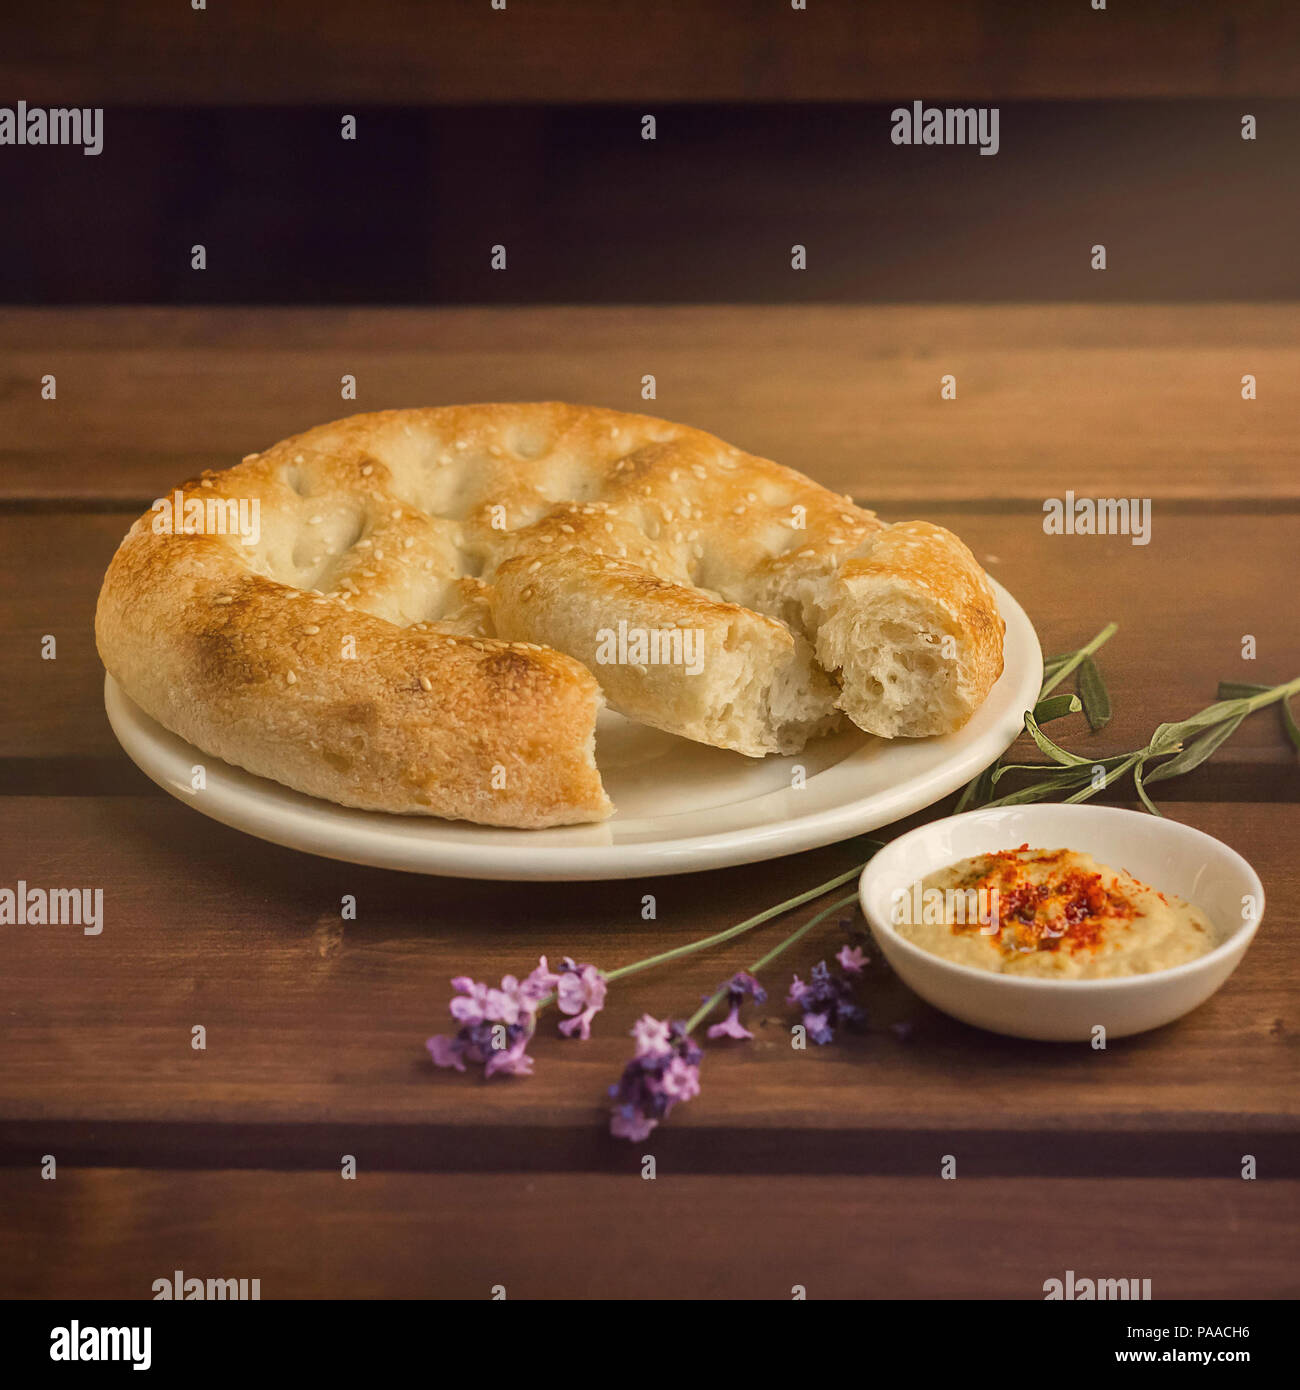 Round fresh bread, sprinkled with sesame seeds, lies on a plate. Next to a small plate with sauce and a branch of lavender Stock Photo